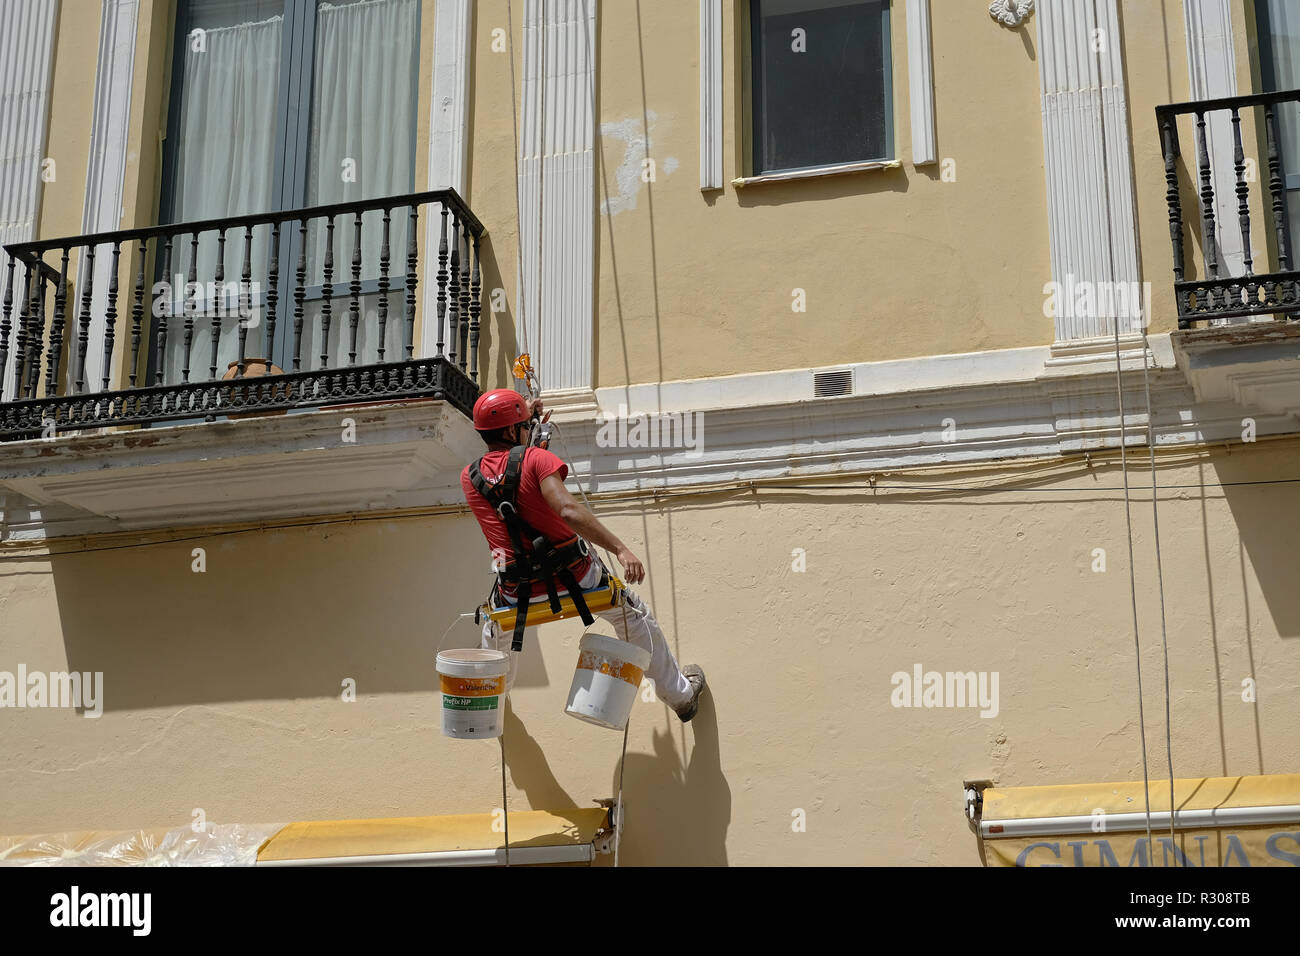 A decorator paints a house whilst hanging from a pulley hoist in Cordoba, Spain. Stock Photo